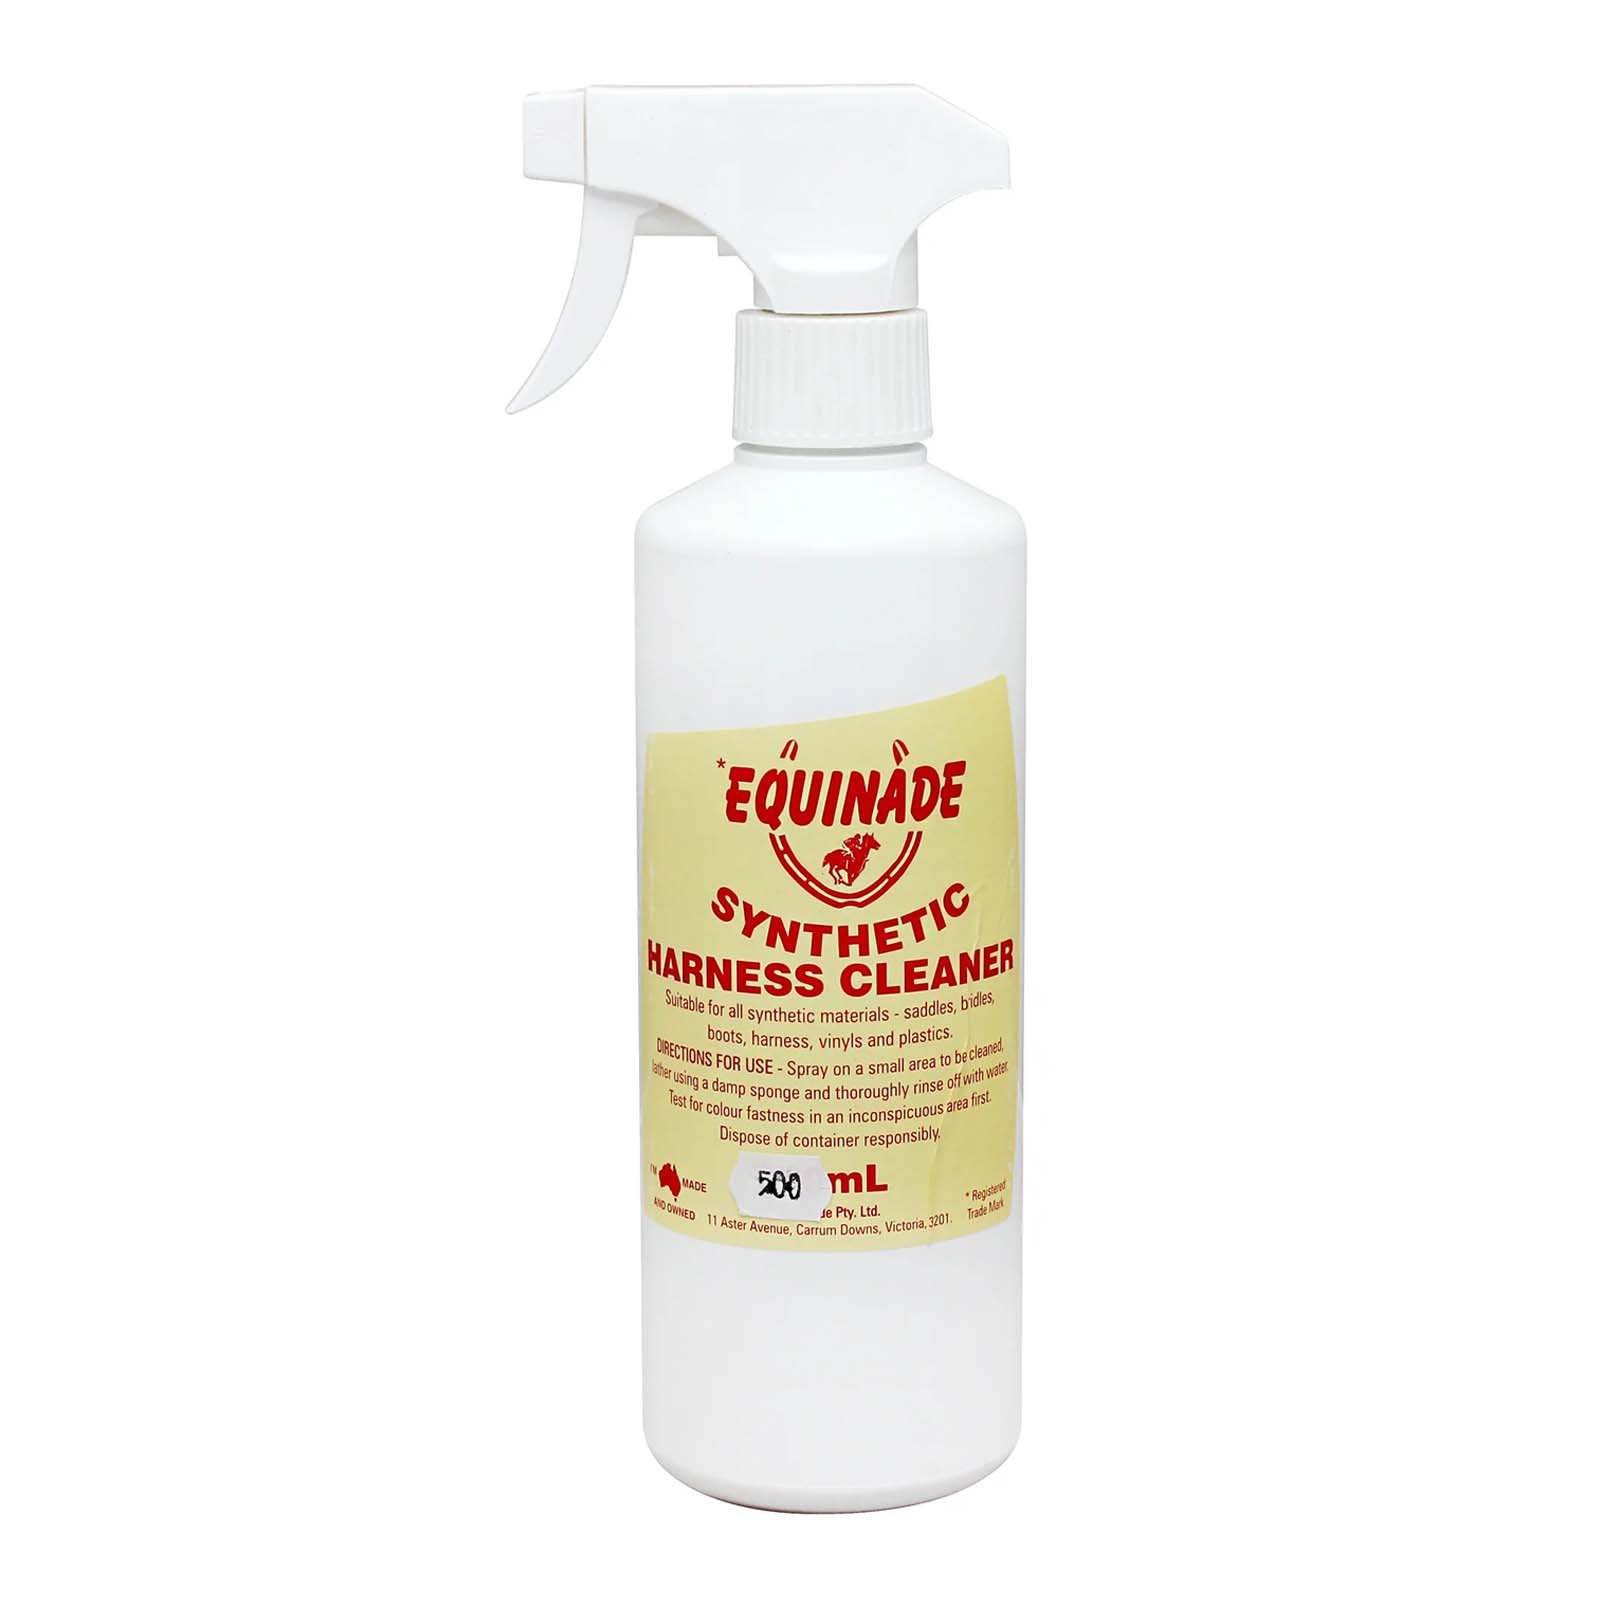 Equinade Synthetic Harness Cleaner for Horses